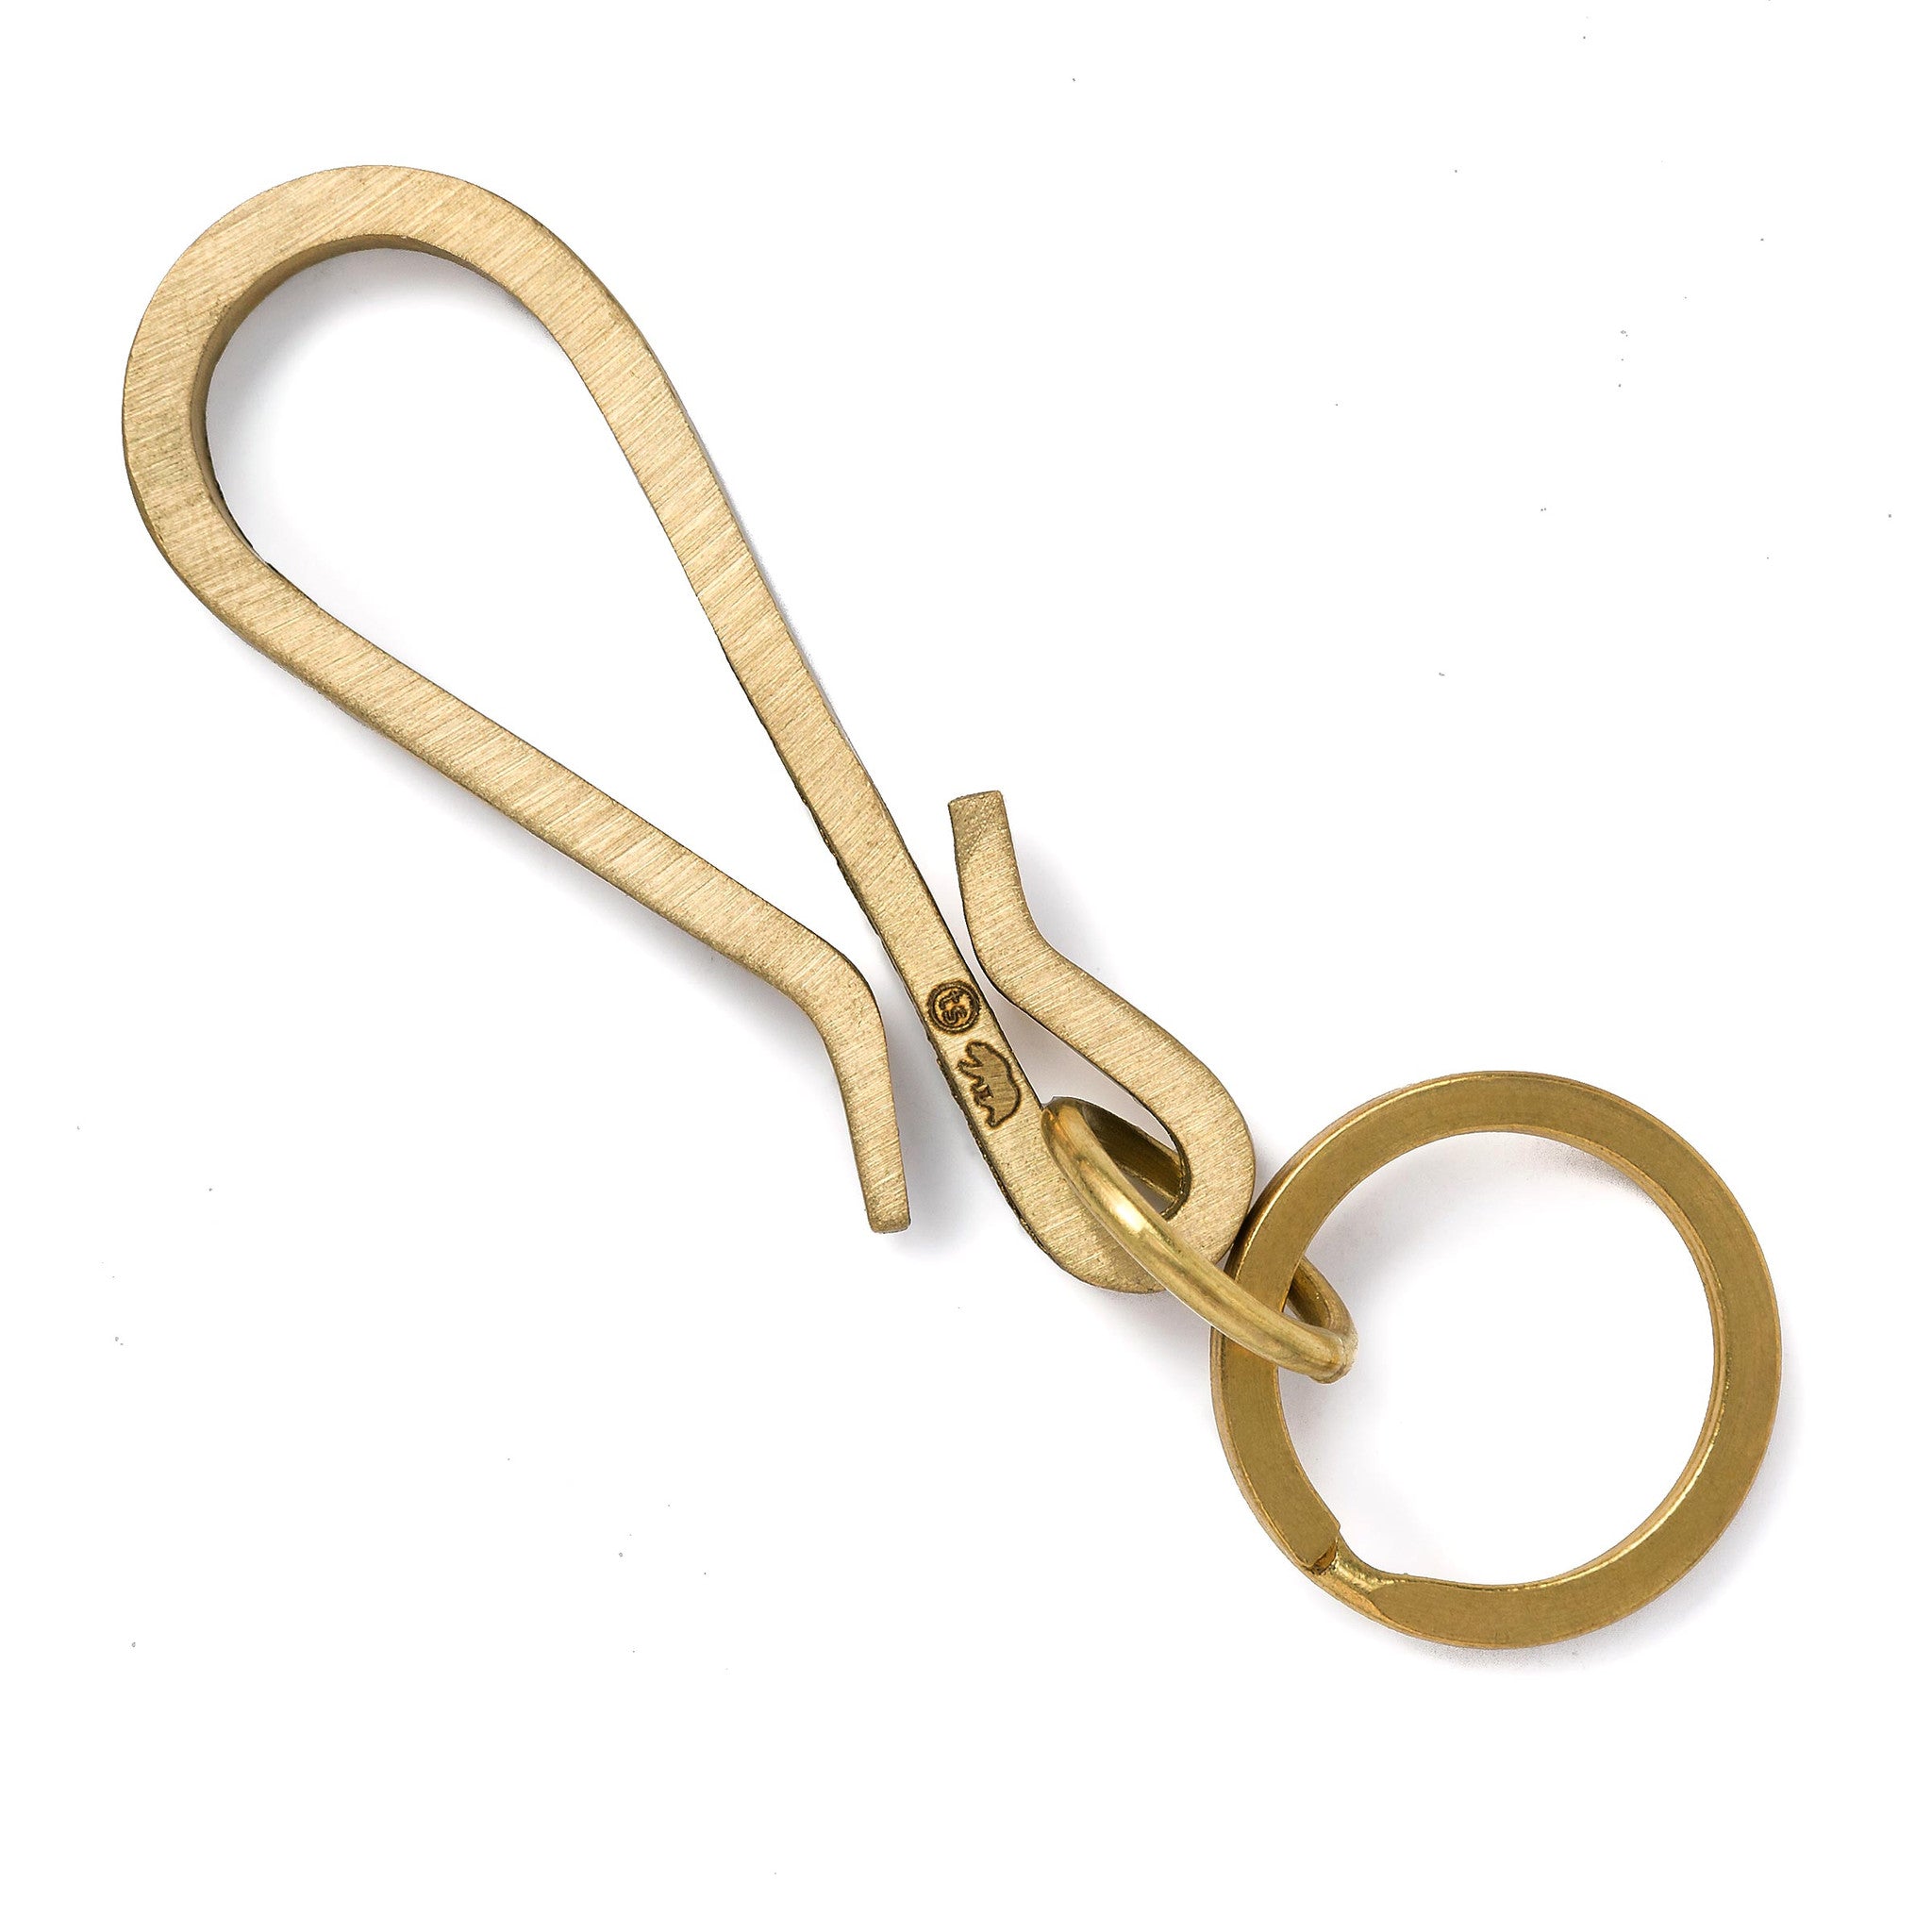 The Keyhook in Raw Brass  Taylor Stitch - Classic Men's Clothing